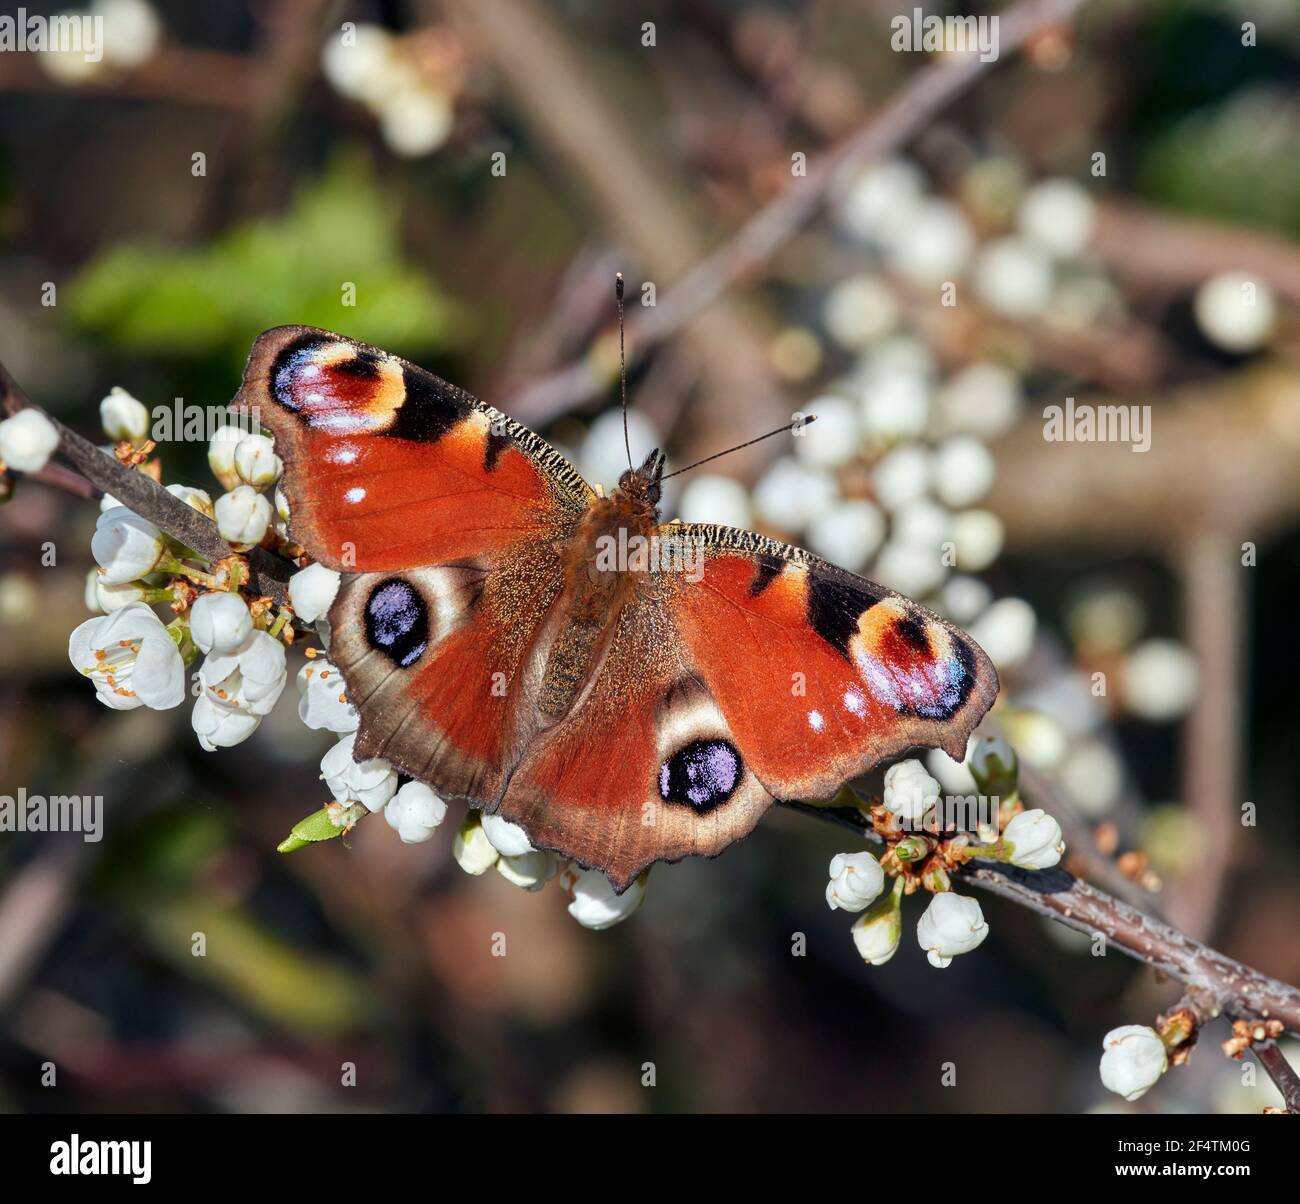 Peacock butterfly nectaring on blackthorn flowers. Hurst Meadows, East Molesey, Surrey. Stock Photo